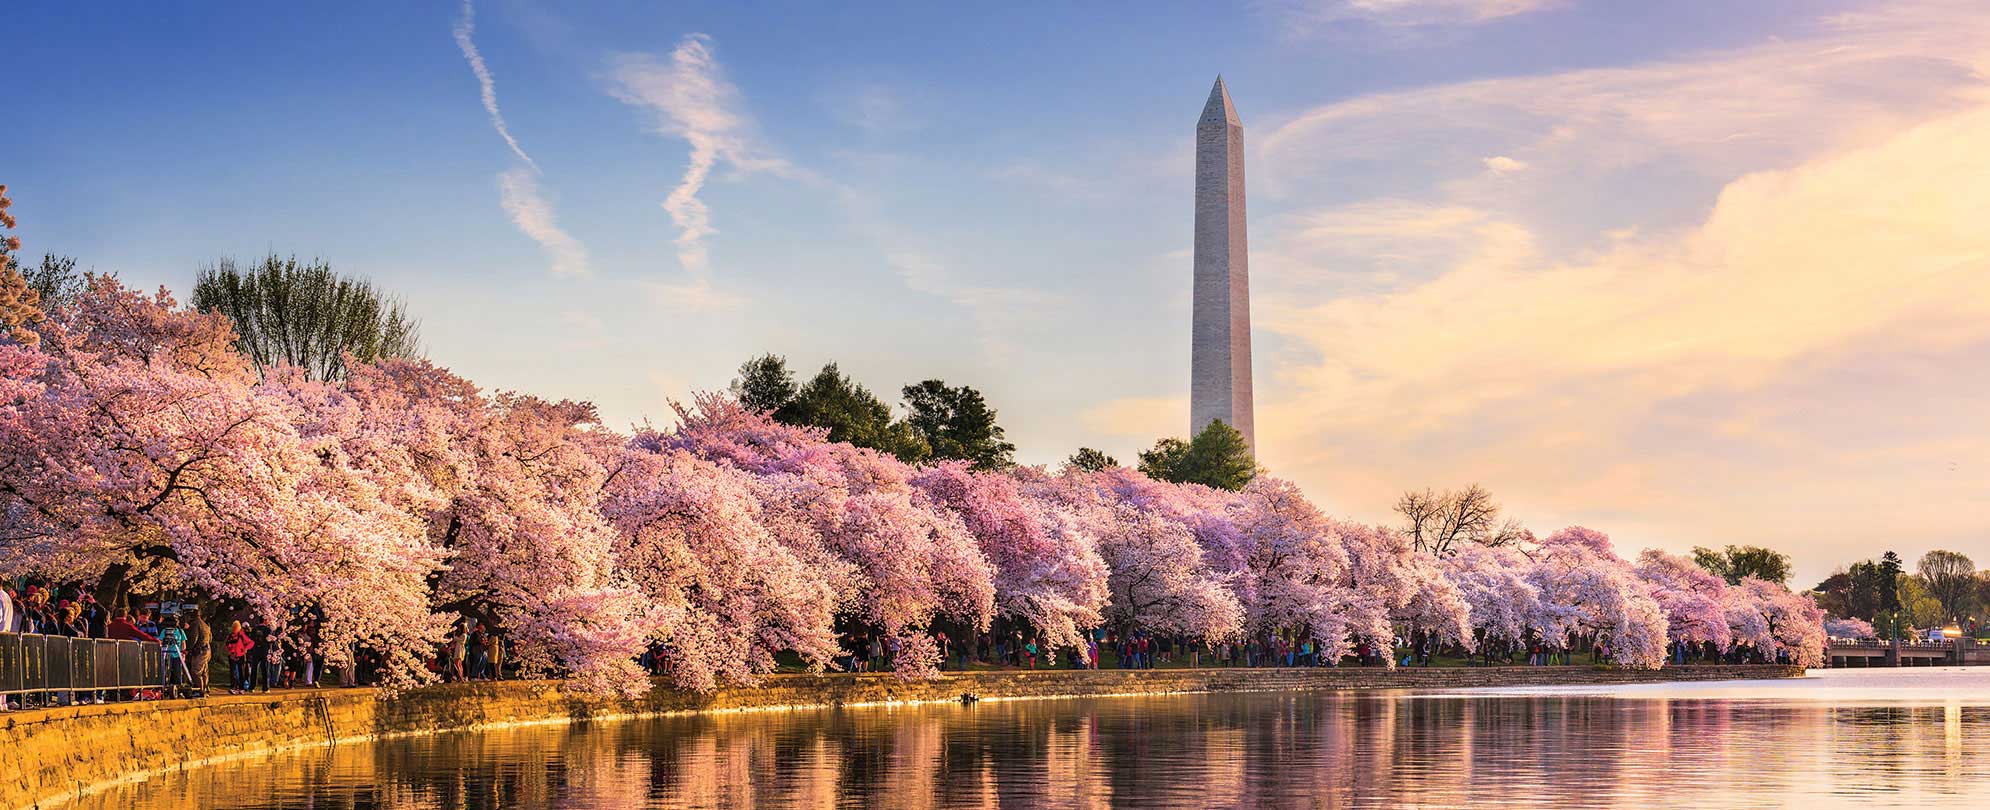 The Washington Monument surrounded by blooming cherry blossom trees in the spring at the National Mall in Washington, D.C.